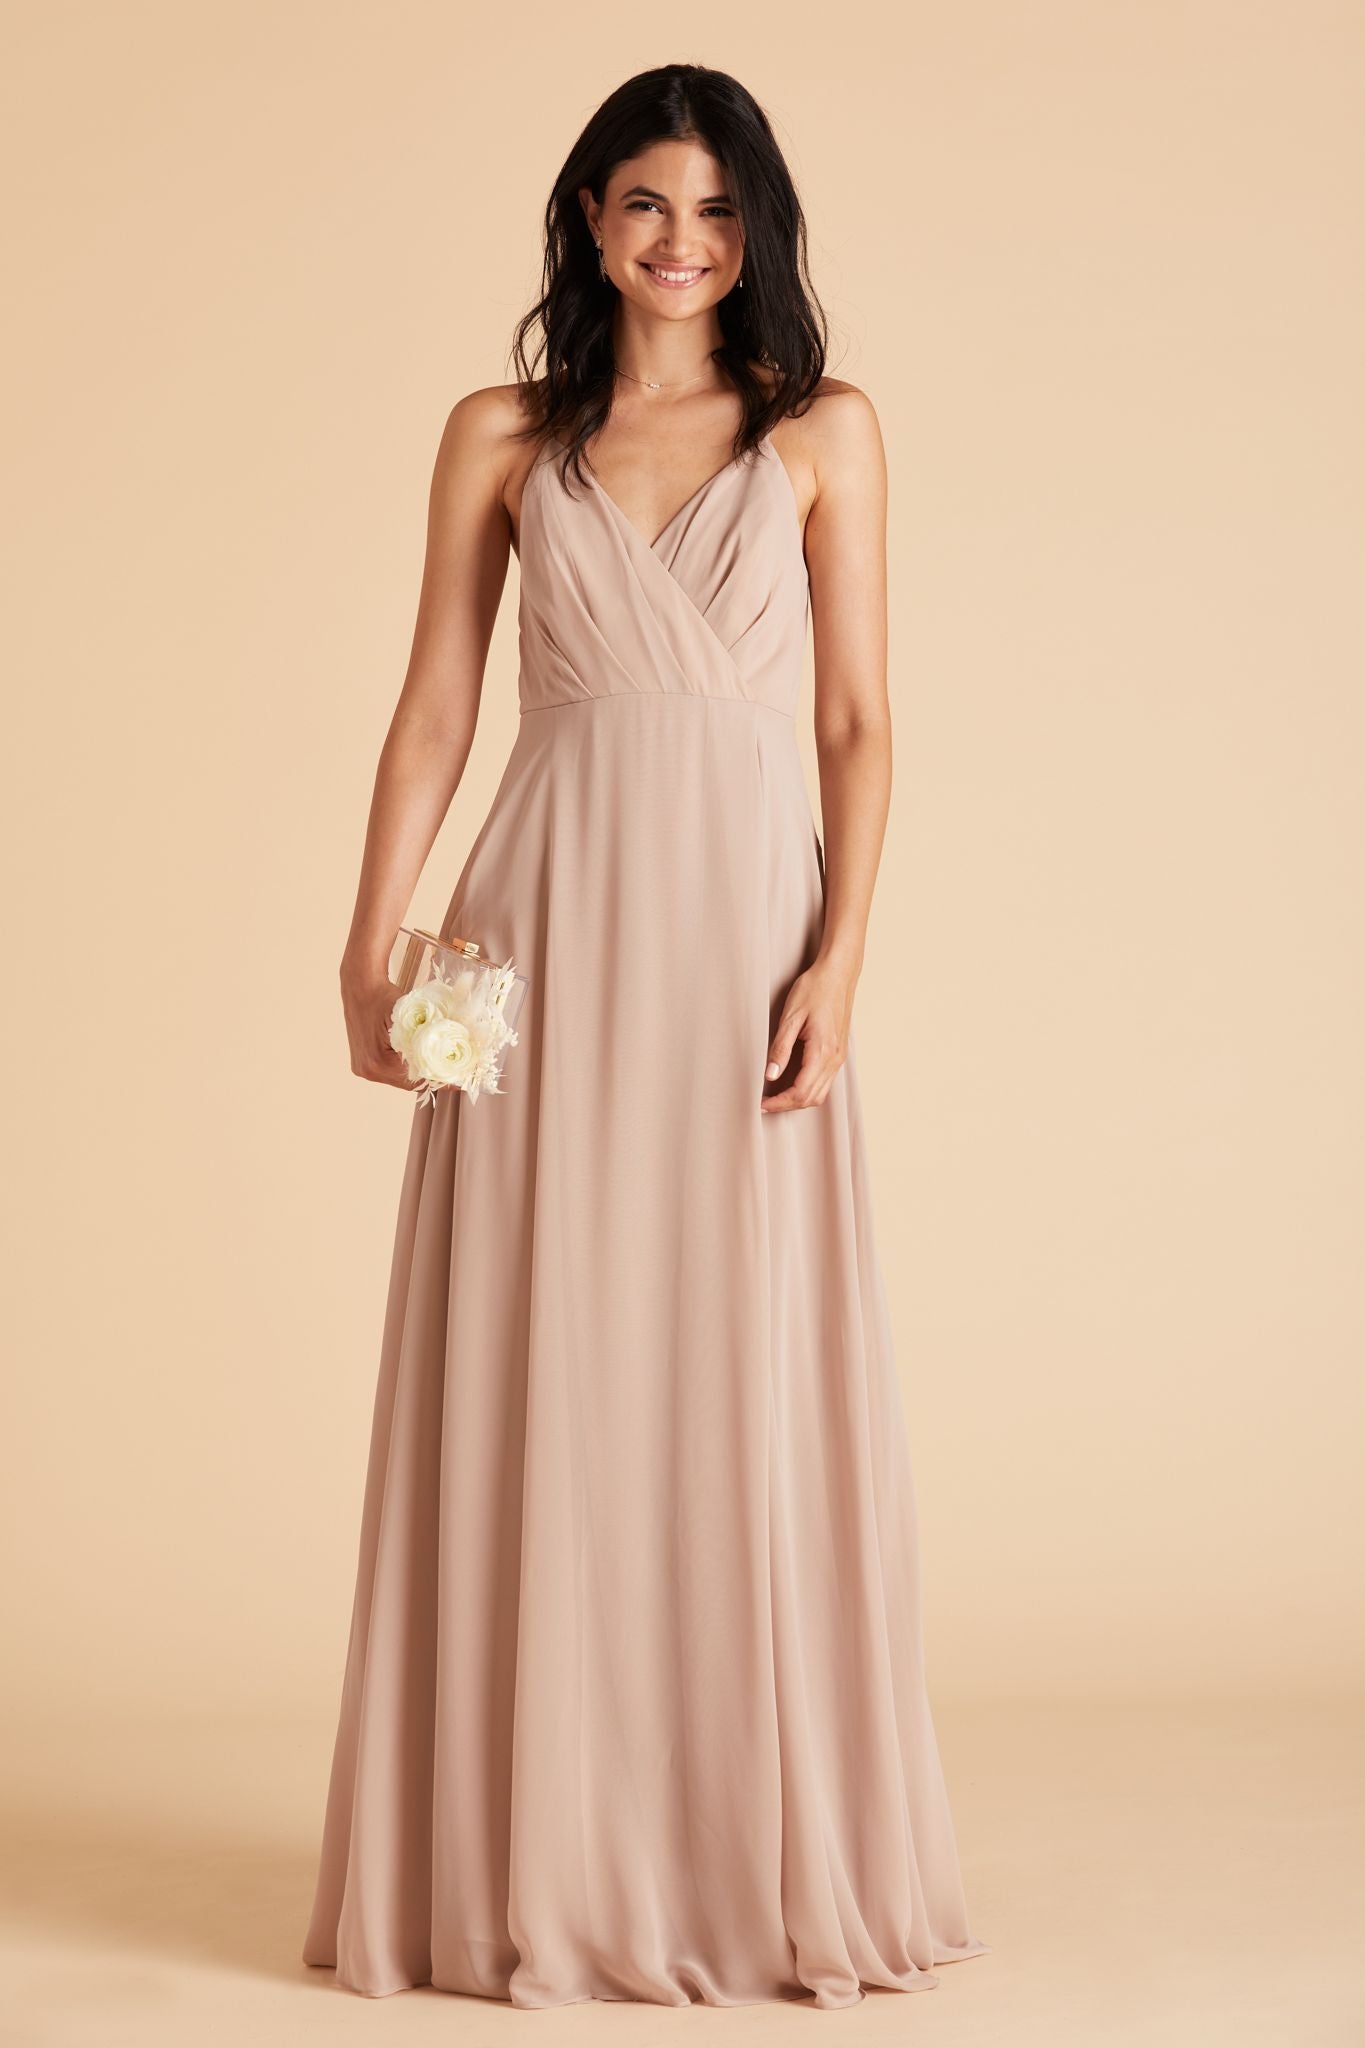 Front view of the Kaia Dress in taupe chiffon worn by a slender model with a light skin tone. 